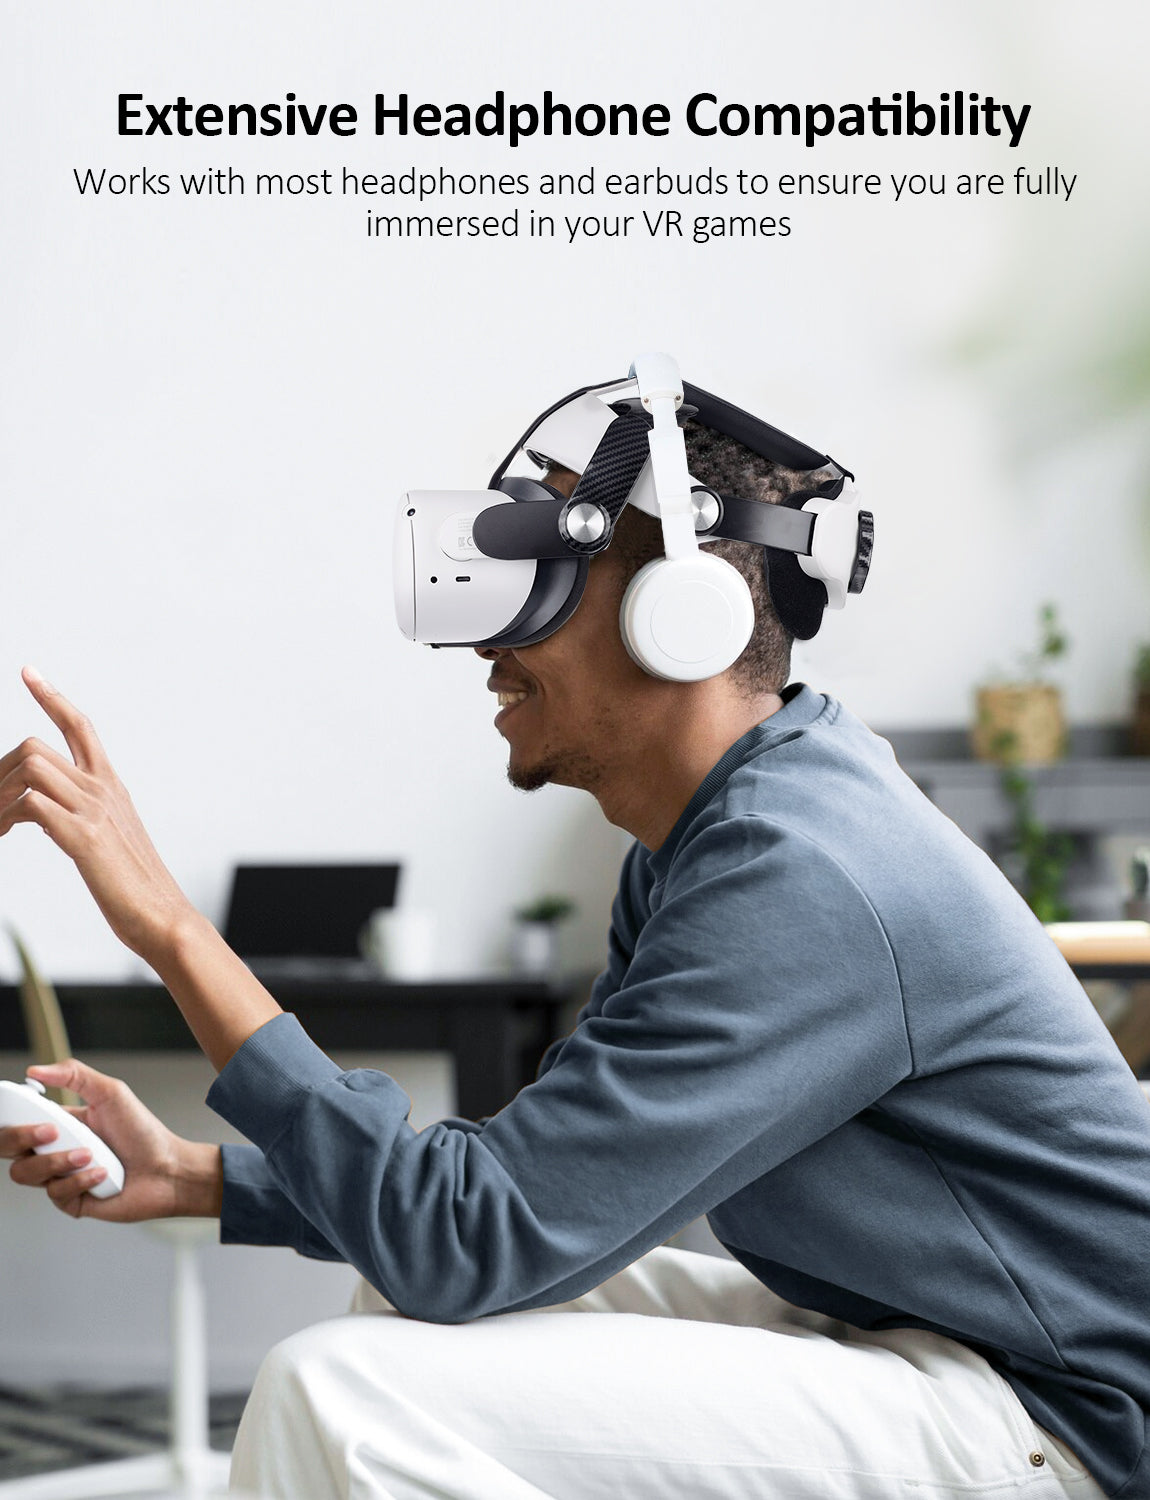 Works with most headphones and earbuds to ensure you are fully immersed in your VR games.